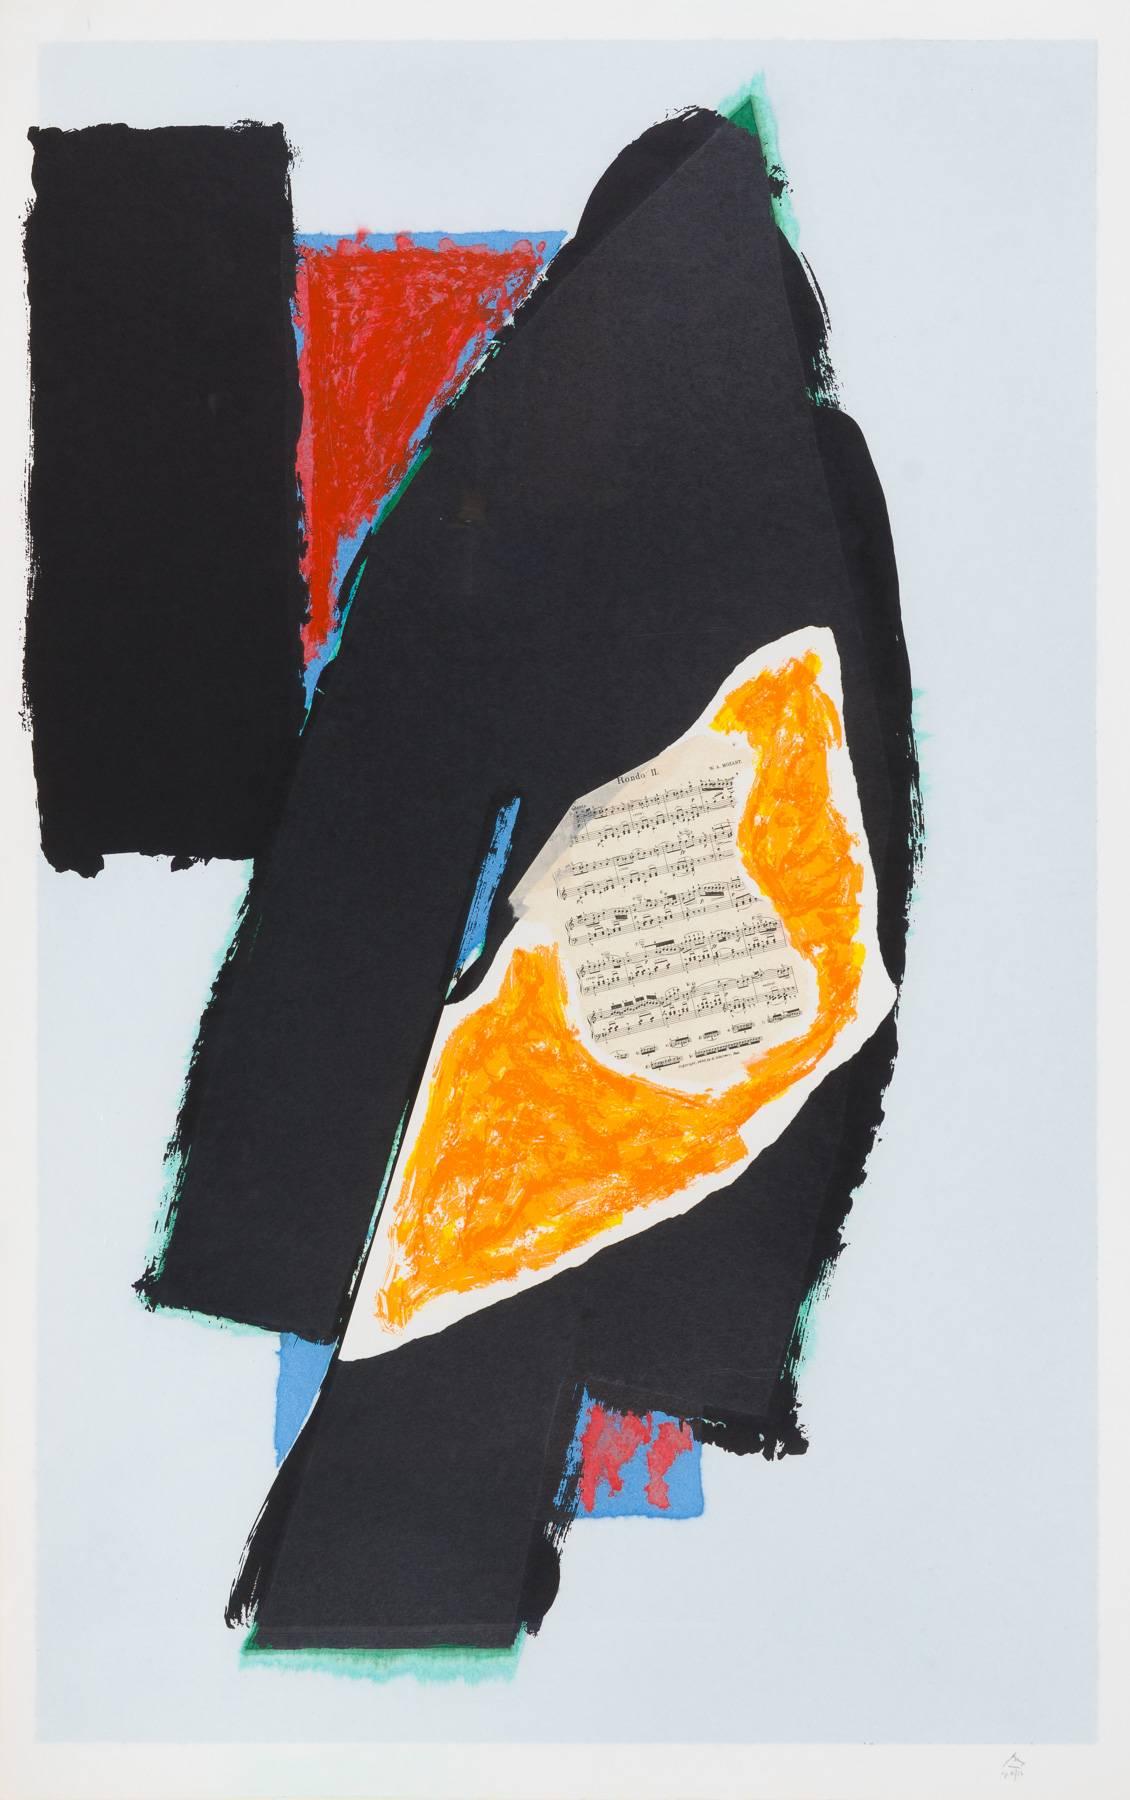 Robert Motherwell Abstract Print - Black for Mozart